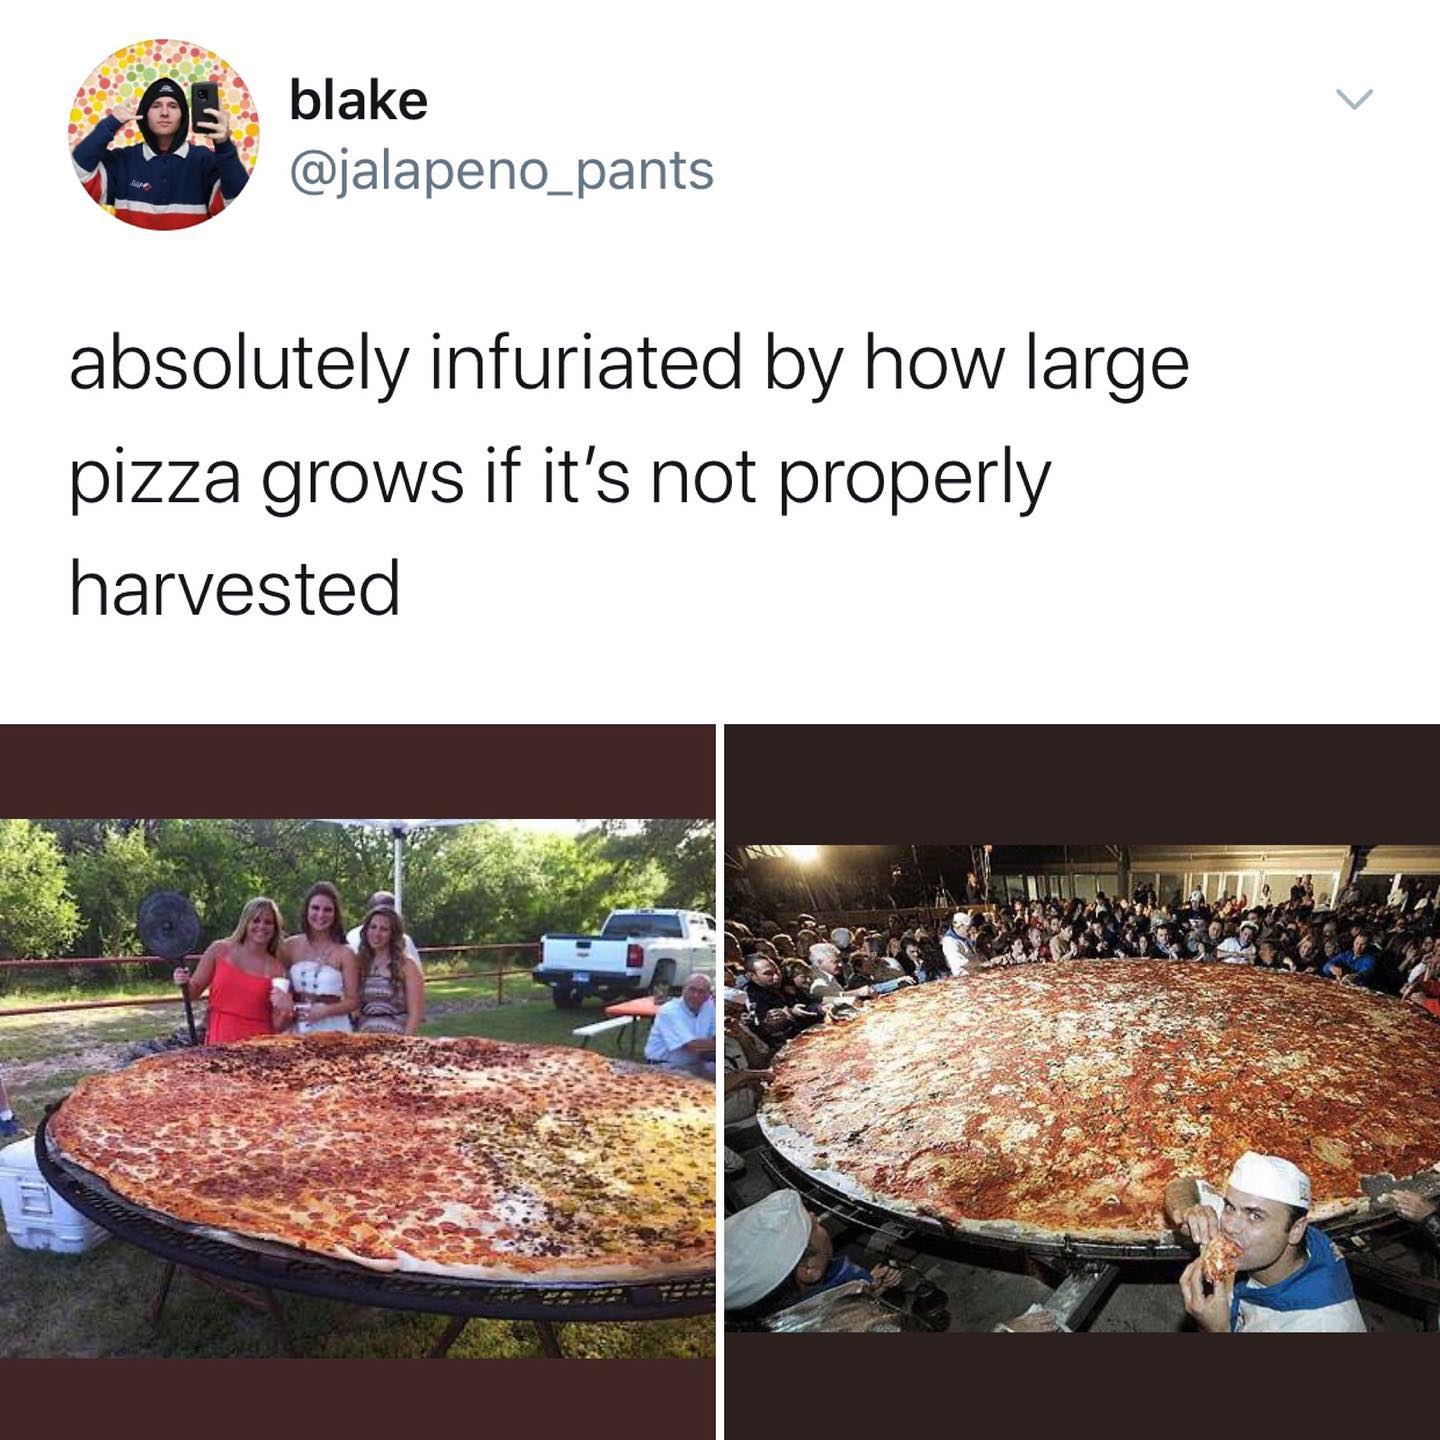 dank memes - twitter - biggest pizza in the world - blake absolutely infuriated by how large pizza grows if it's not properly harvested